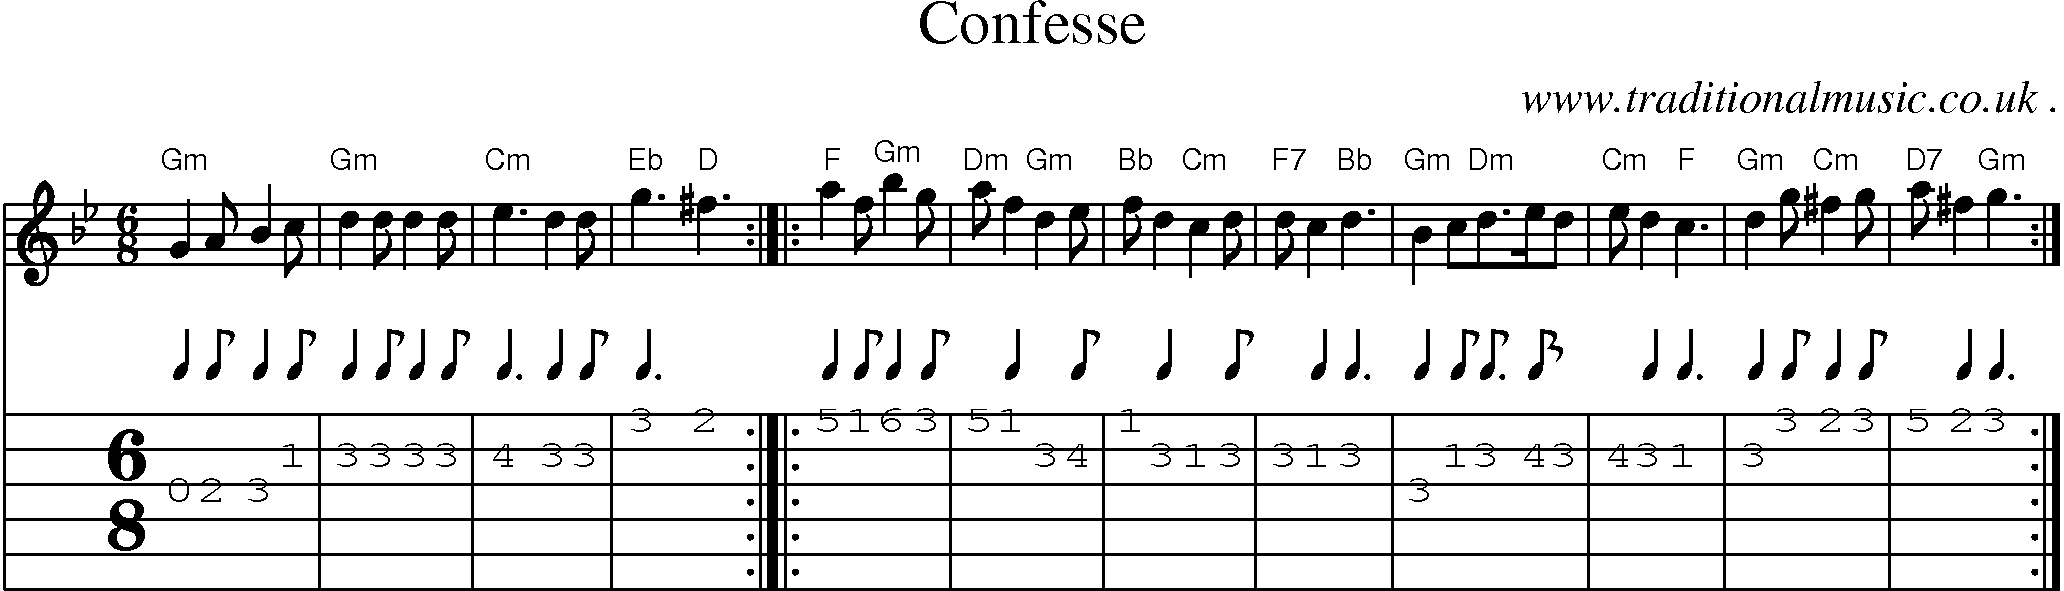 Sheet-Music and Guitar Tabs for Confesse